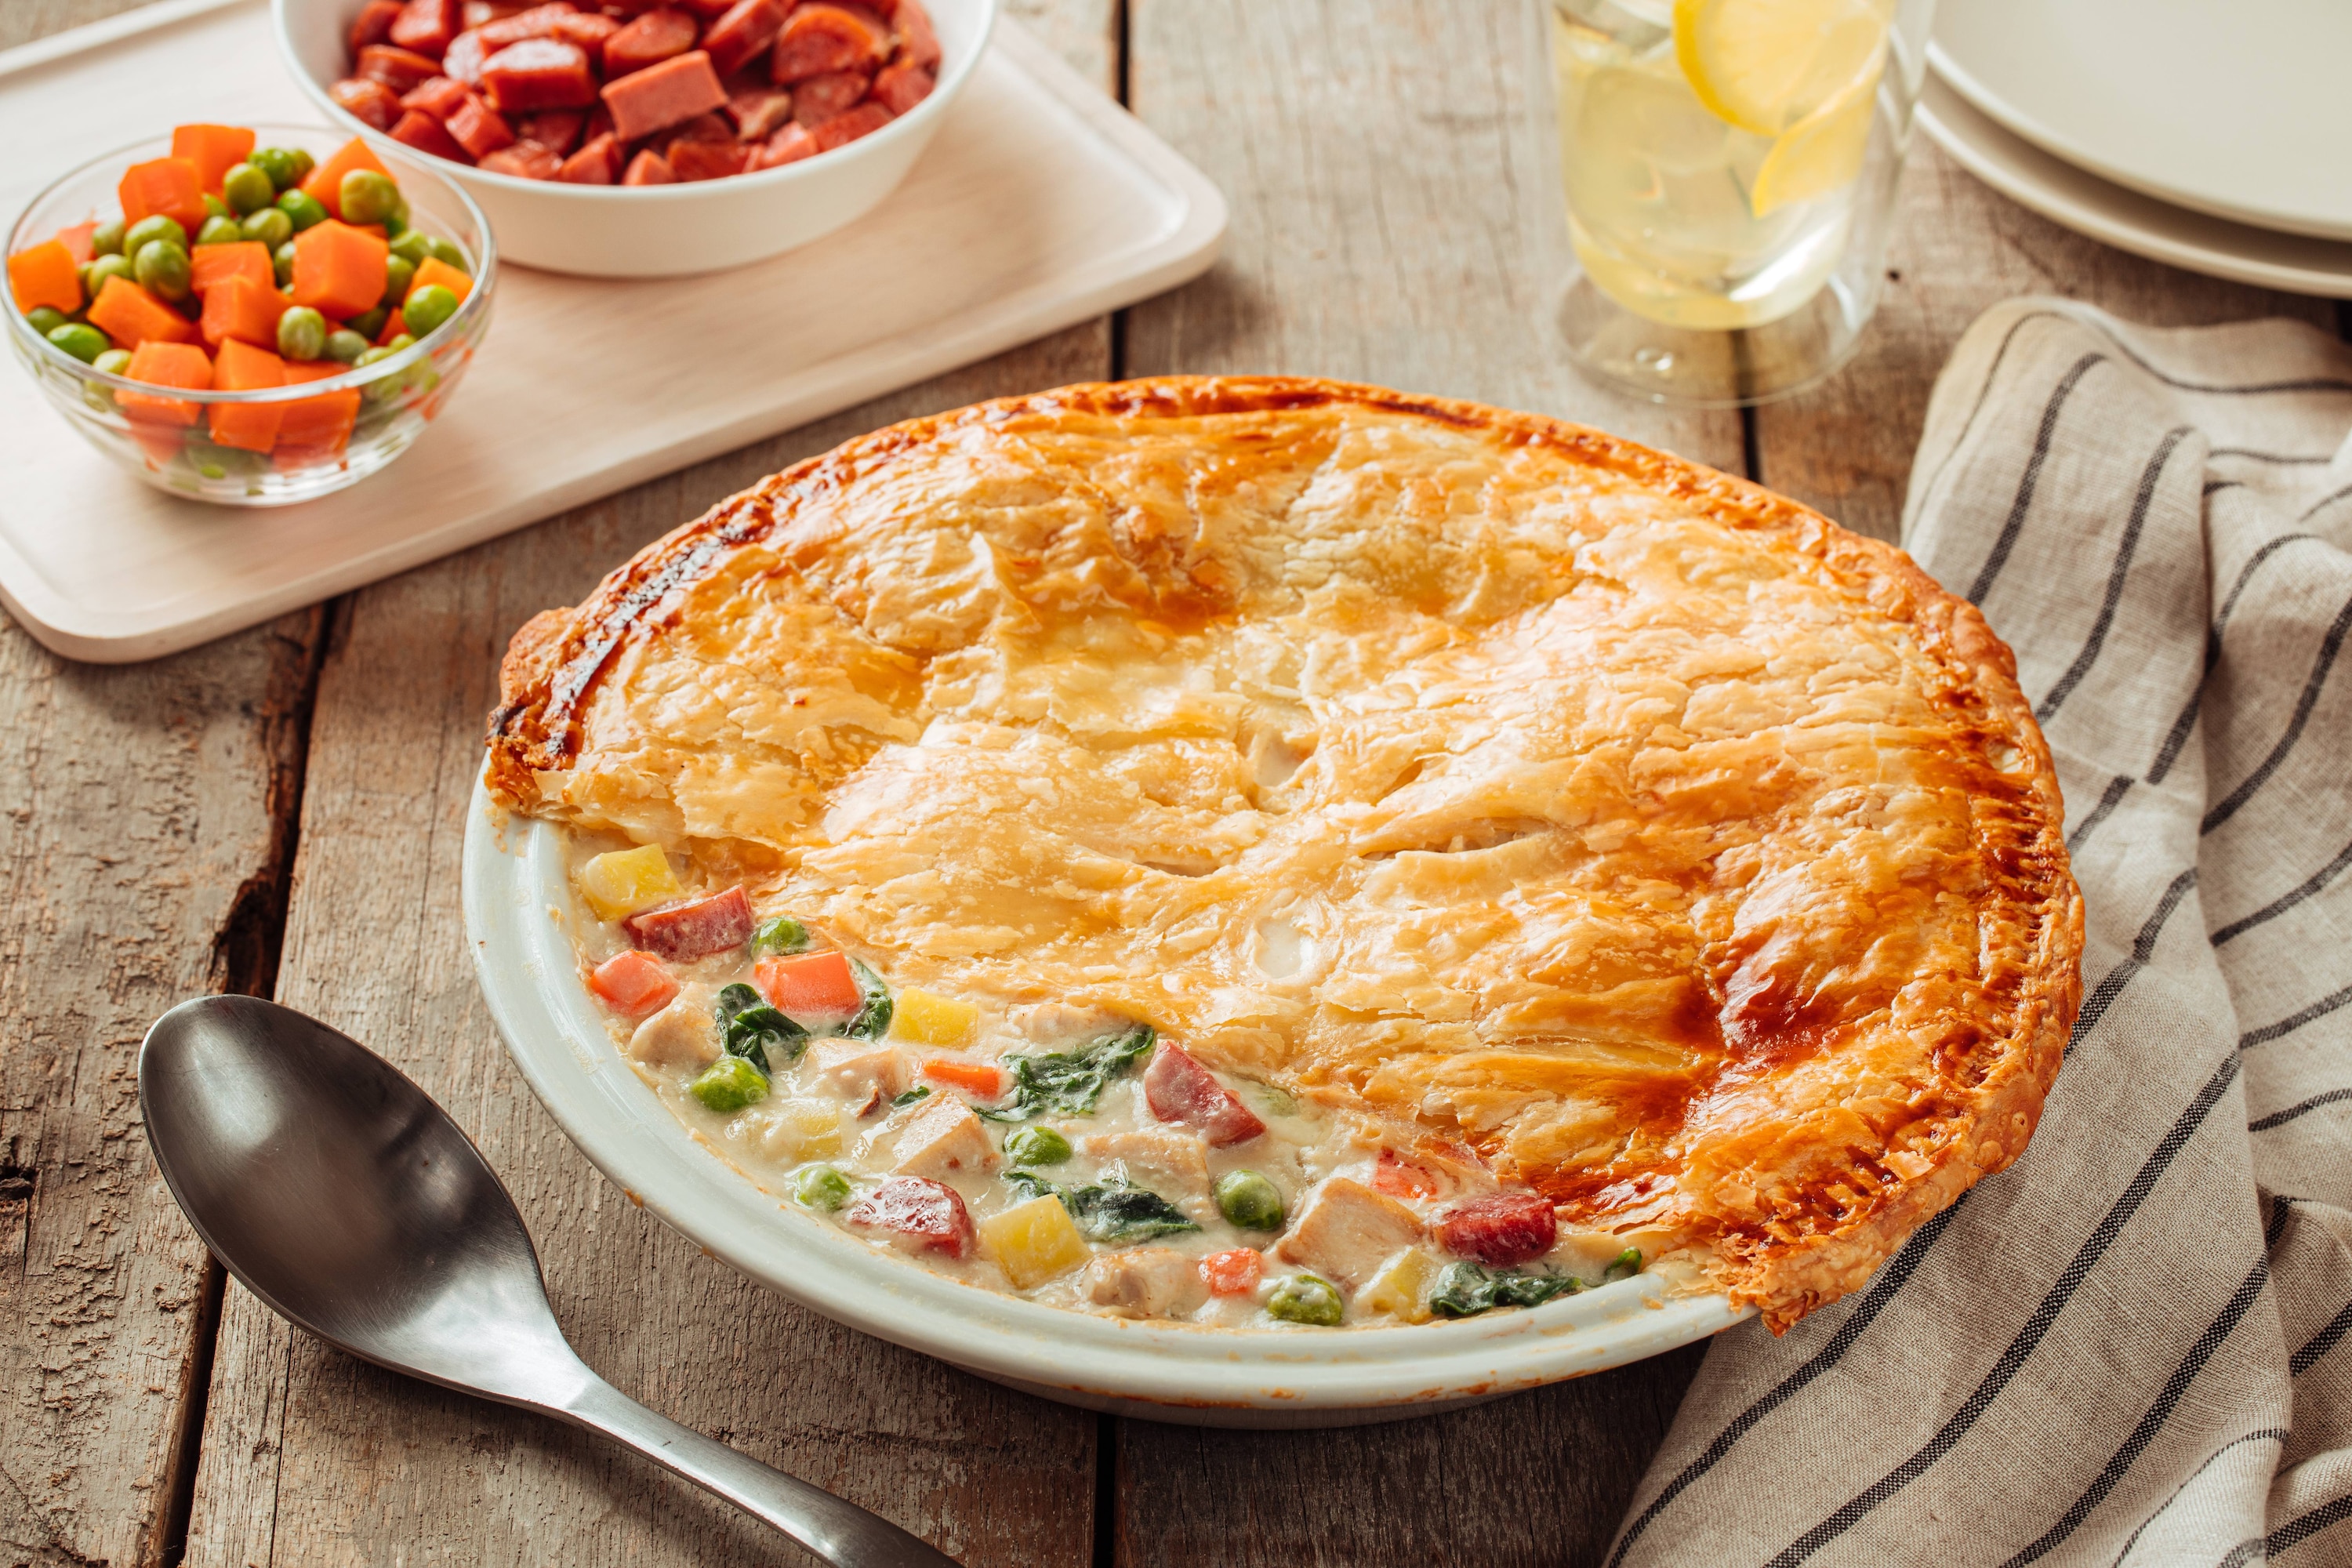 Fancy Up Your Reunions With This Chicken Pastel Pie Recipe